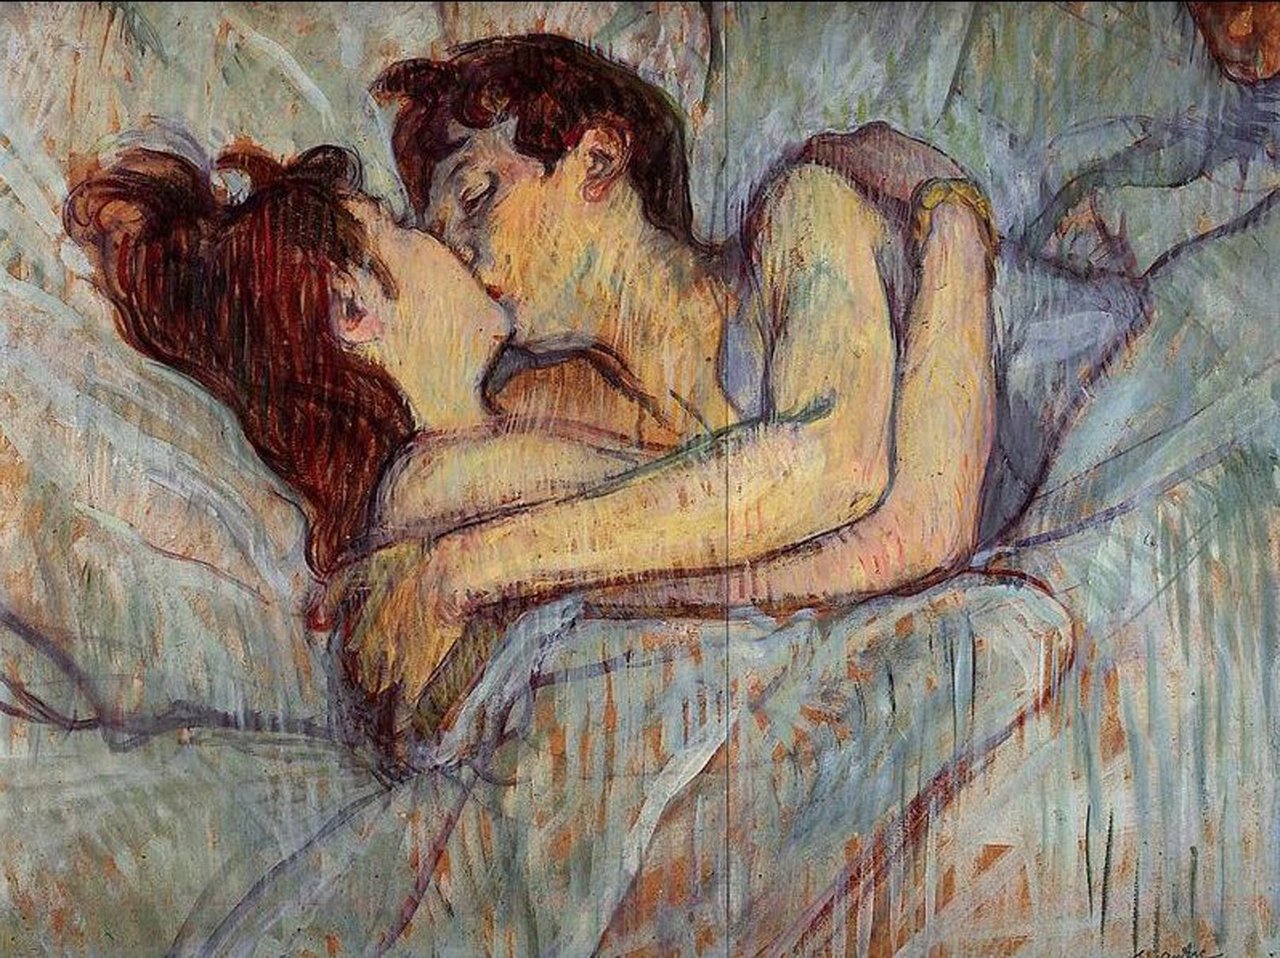 toulouse-lautrec, In Bed the Kiss, 1892.jpg